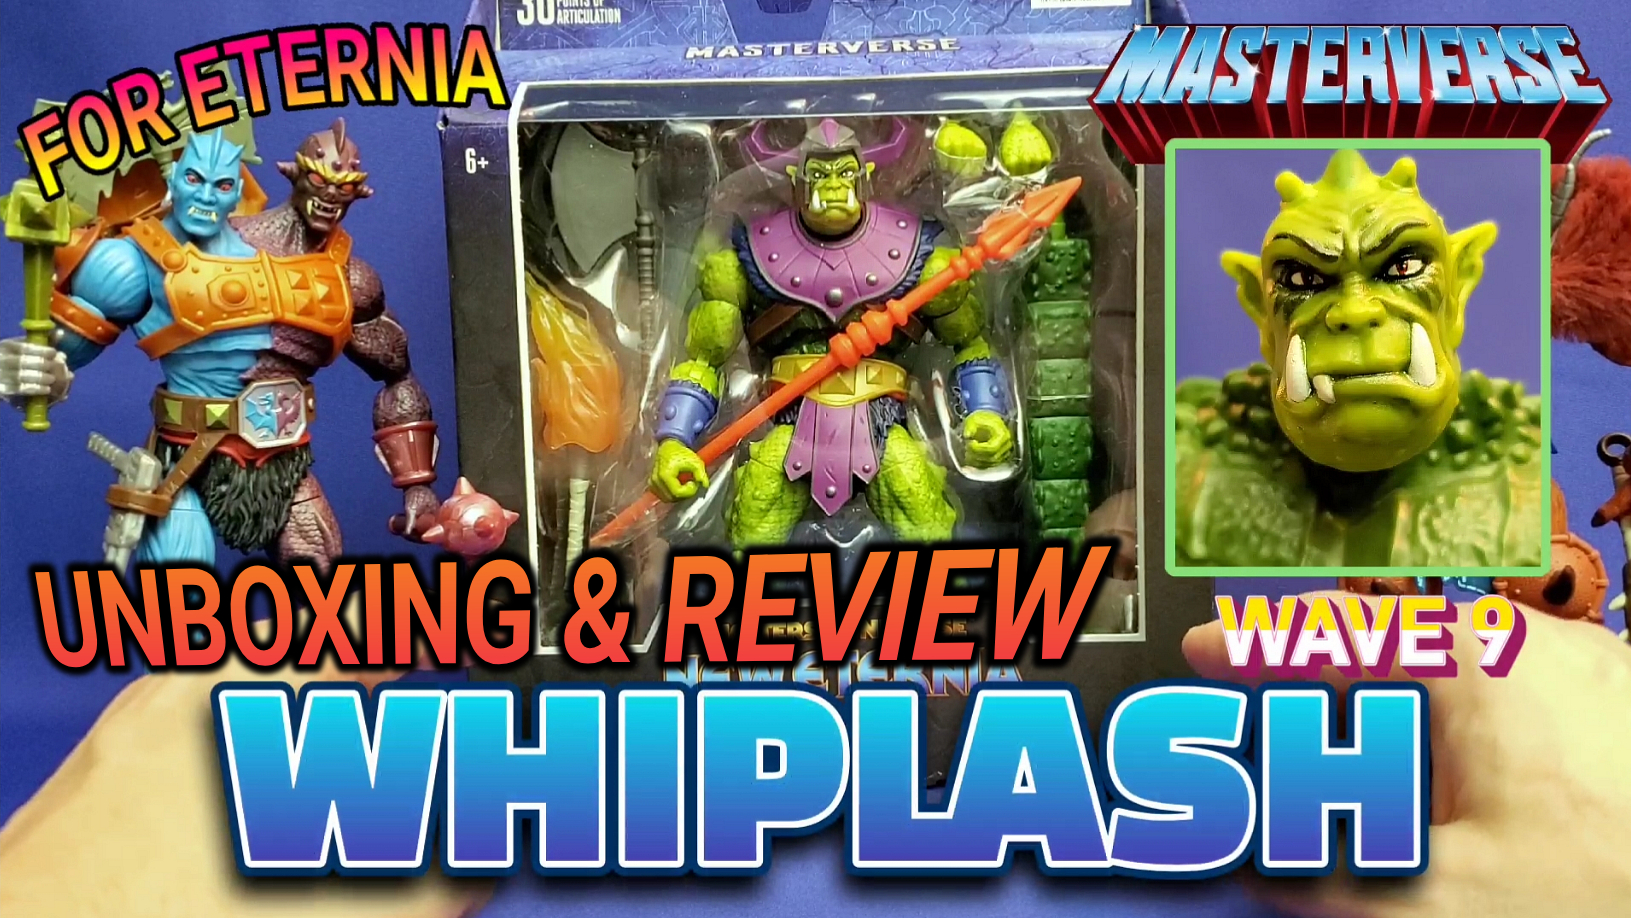 Watch our UNBOXING & REVIEW of the MASTERVERSE Whiplash Wave 9 New Eternia Figure